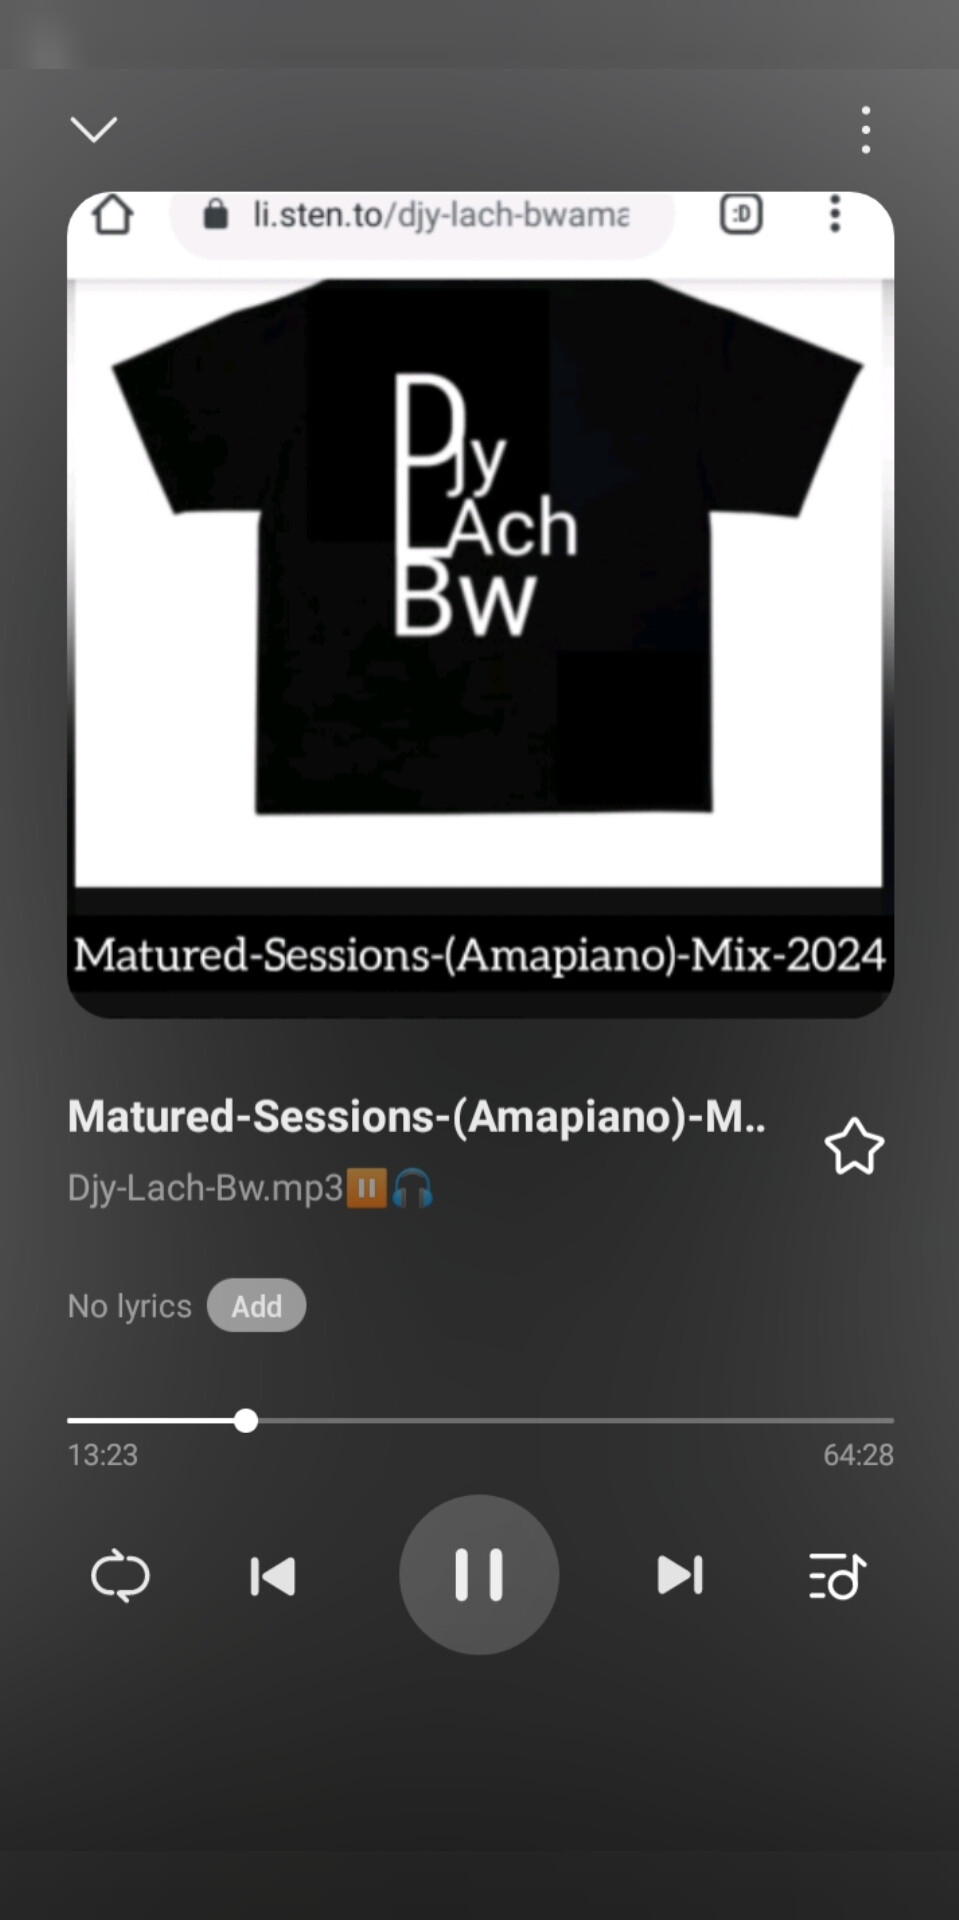 Matured-Sessions-Amapiano-Mix-2024 - Djy-Lach-Bw